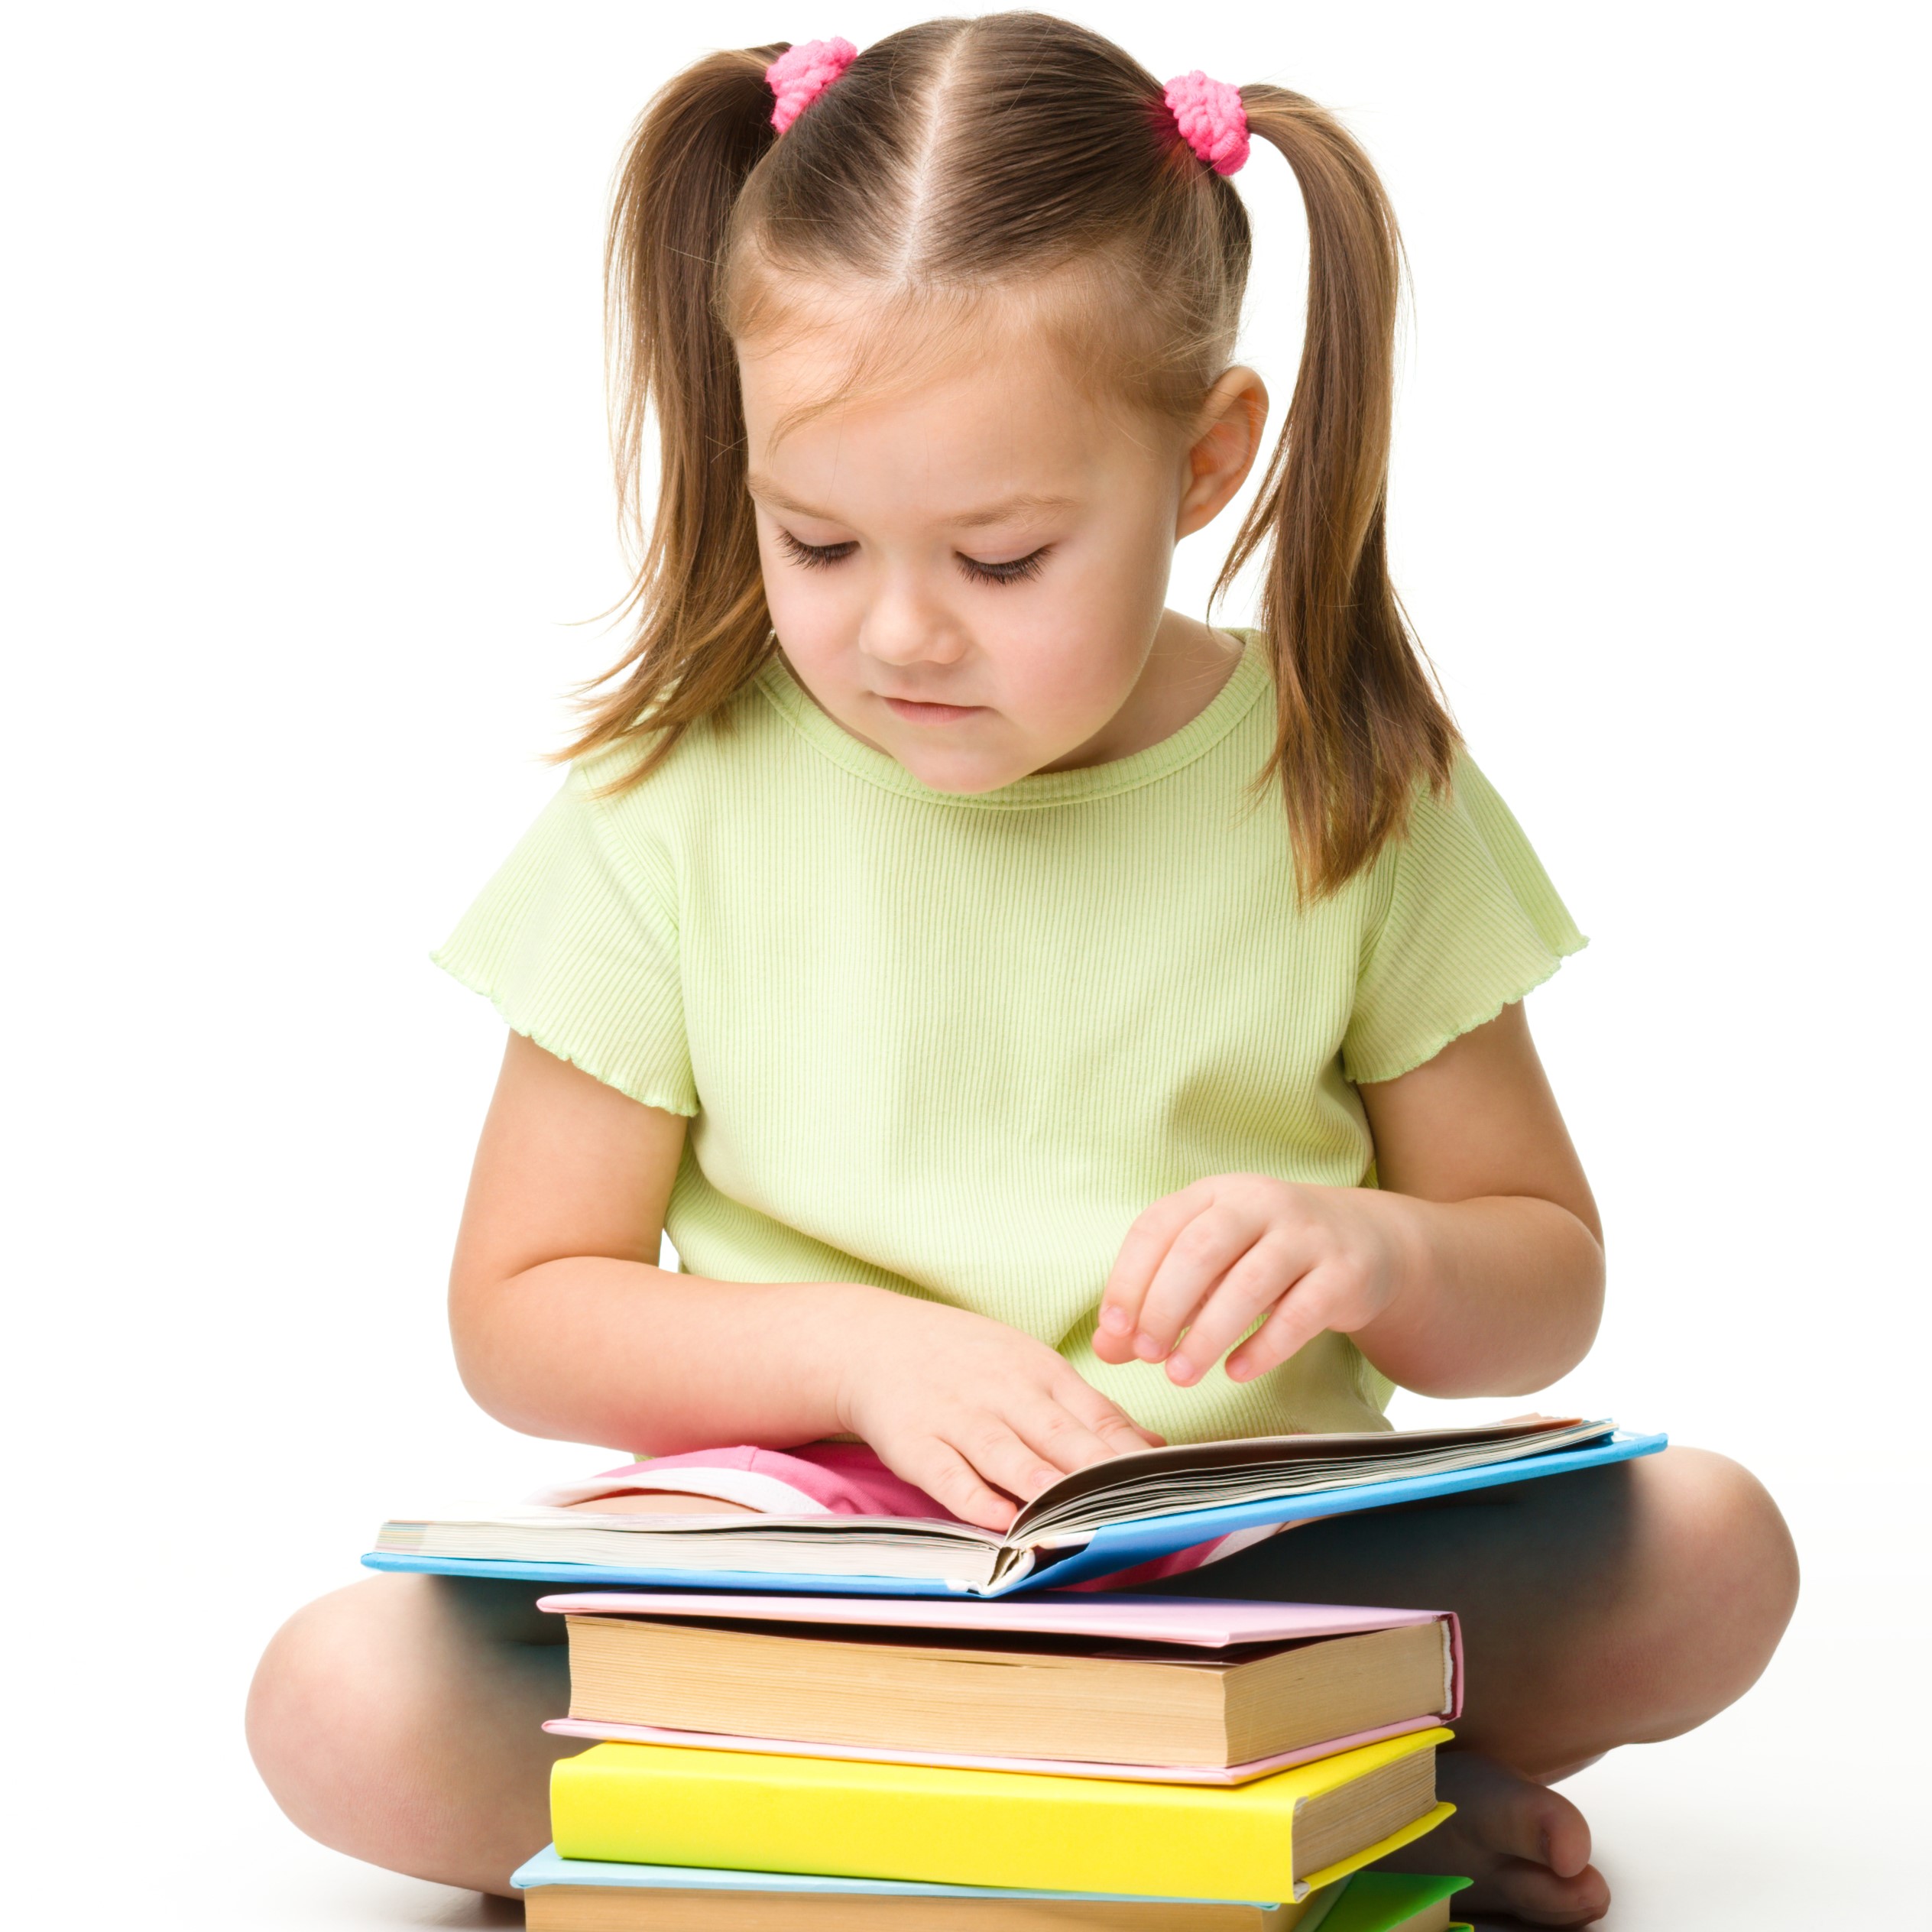 Young girl with reading books